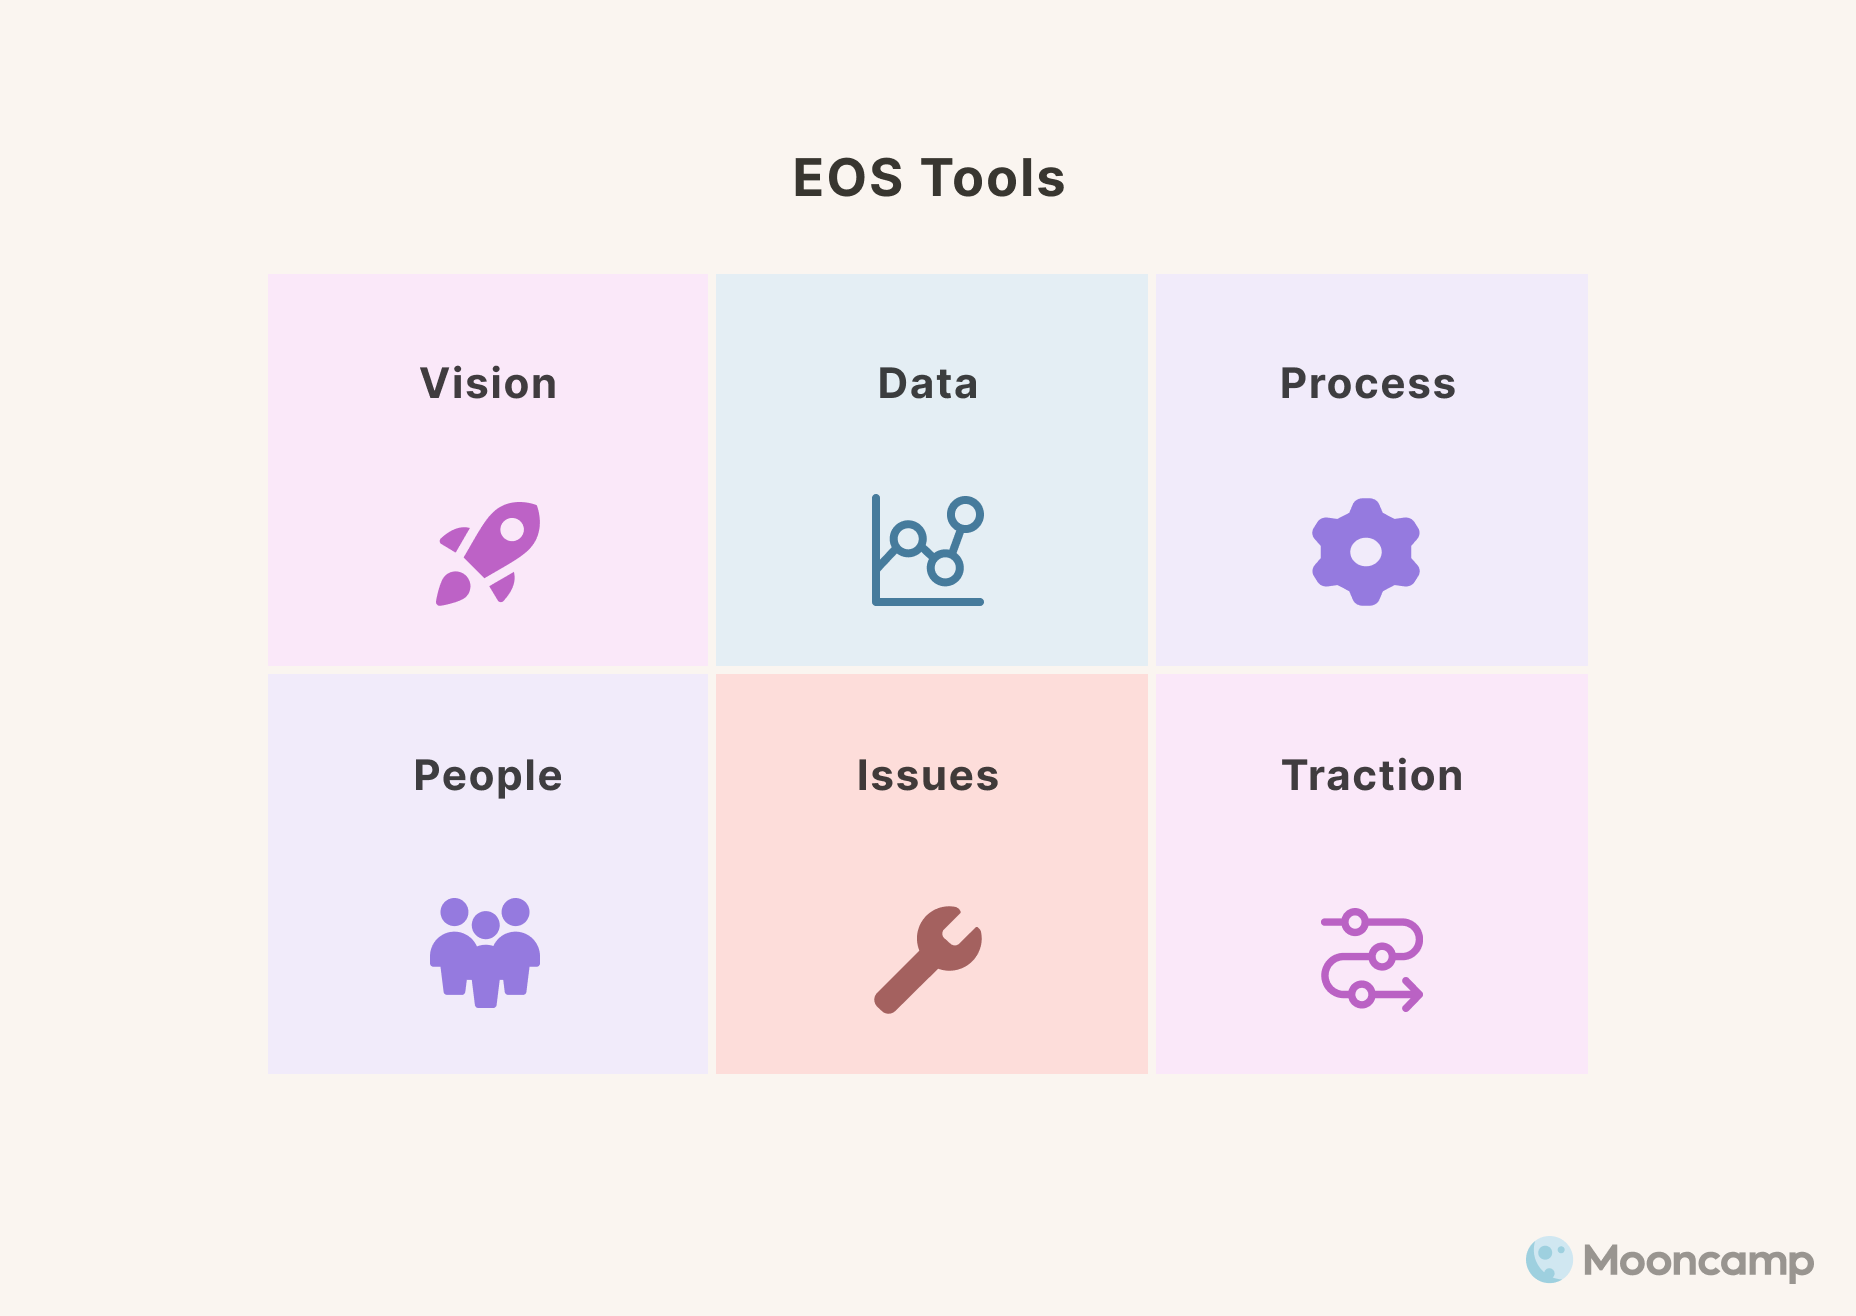 The six tools of EOS